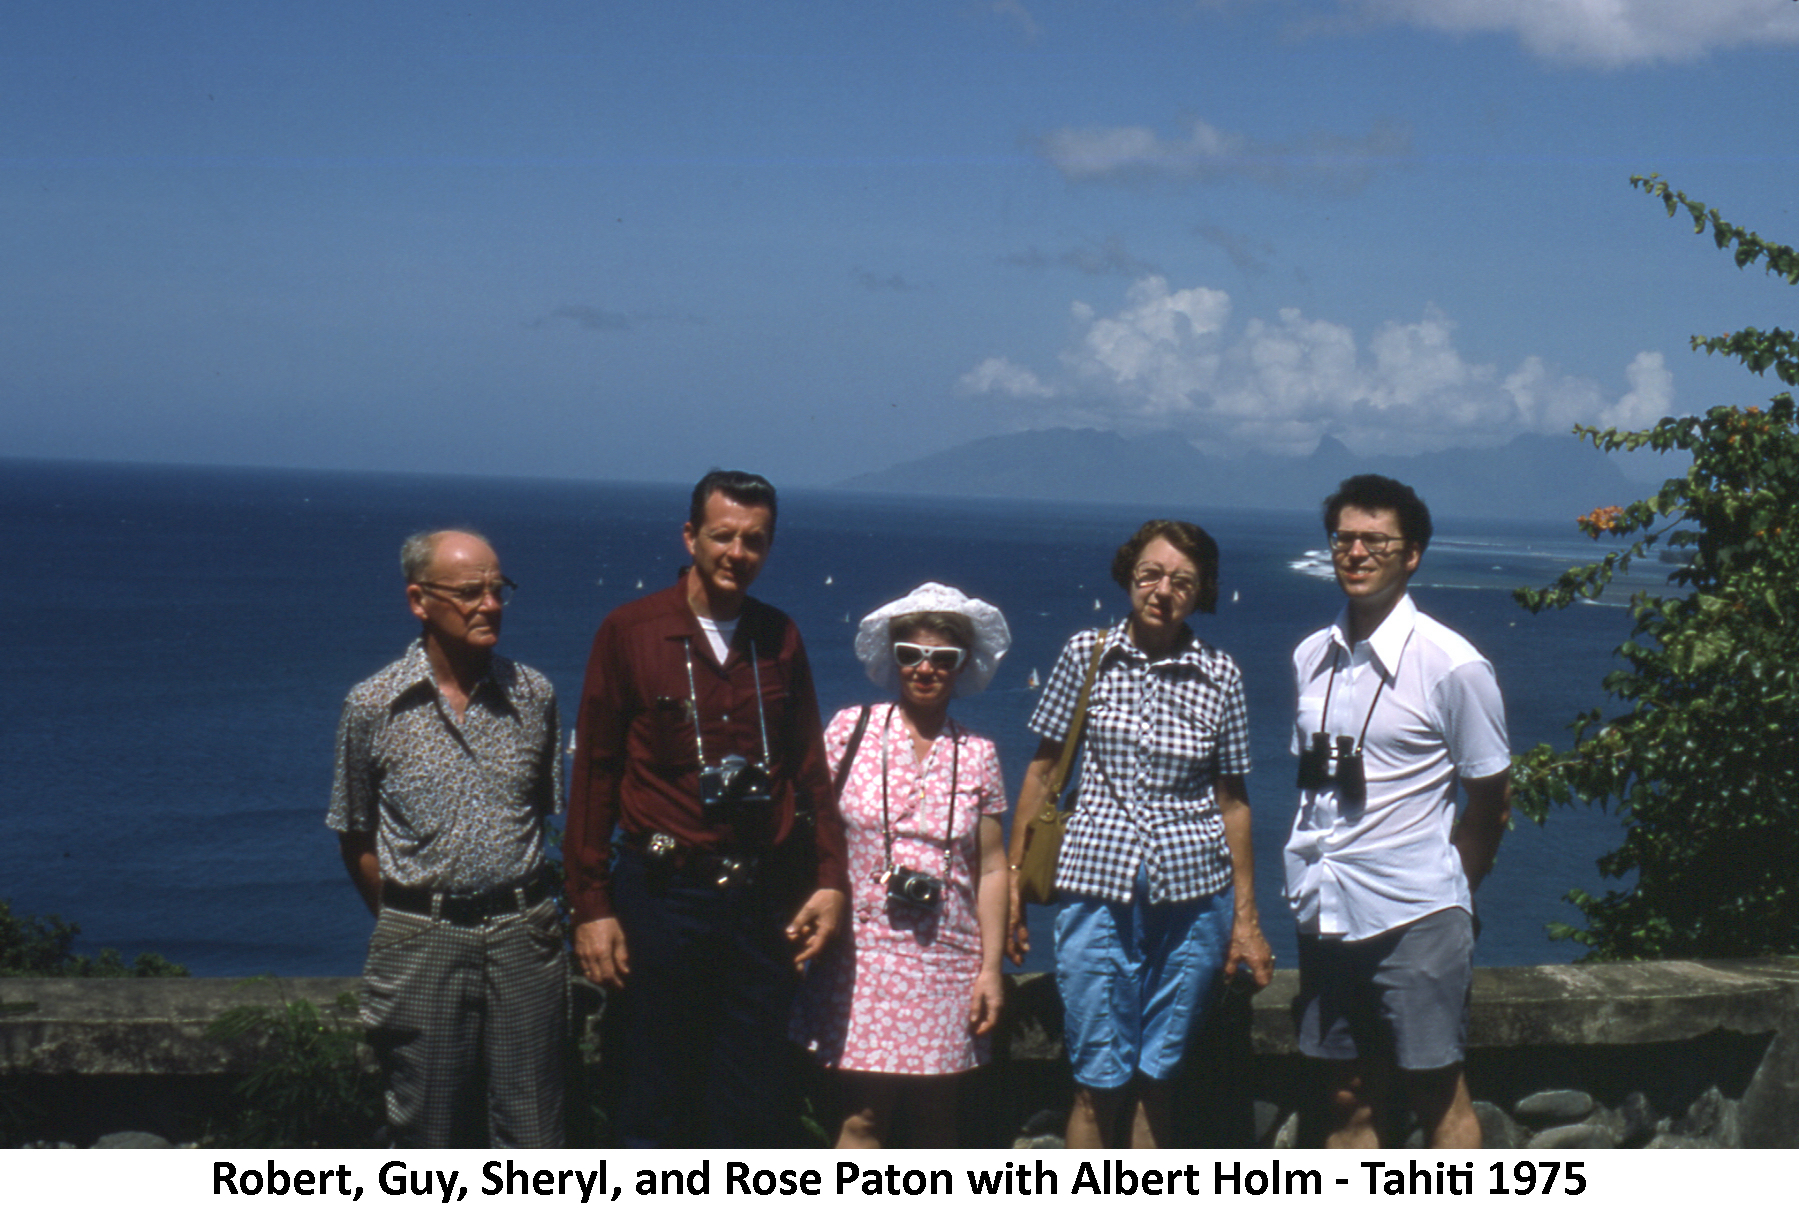 Bob & Rose and Guy & Sheryl Paton and Al Holm standing in front of the ocean 
         dotted with sailboats and a high island in the distance